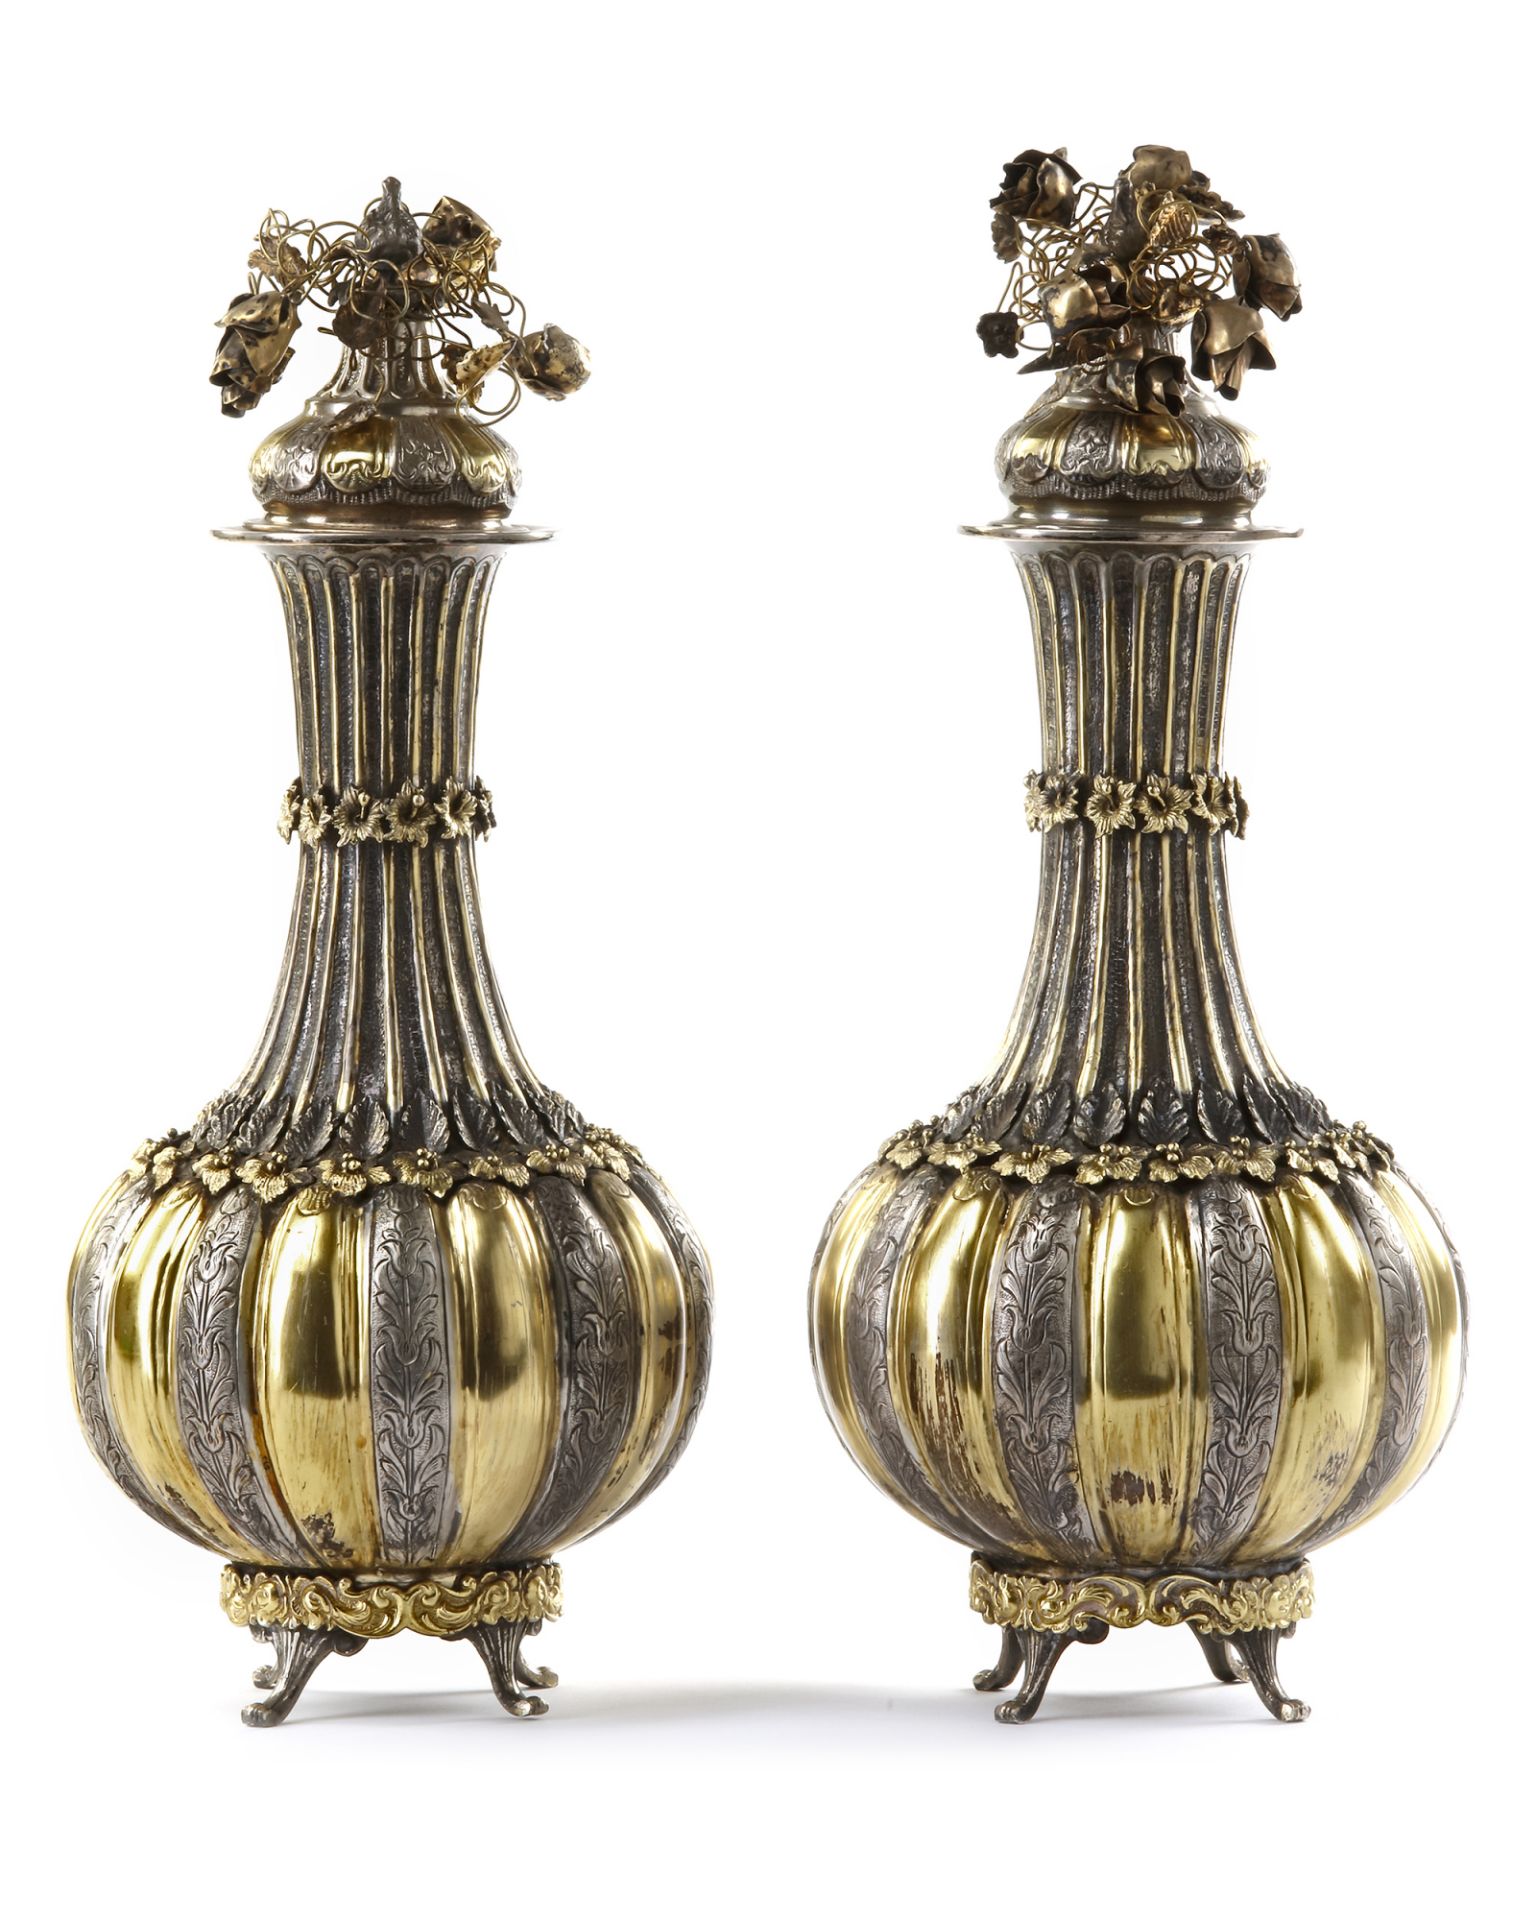 A PAIR OF GILT SILVER VASES WITH COVERS, TURKEY, 19TH CENTURY - Image 4 of 10